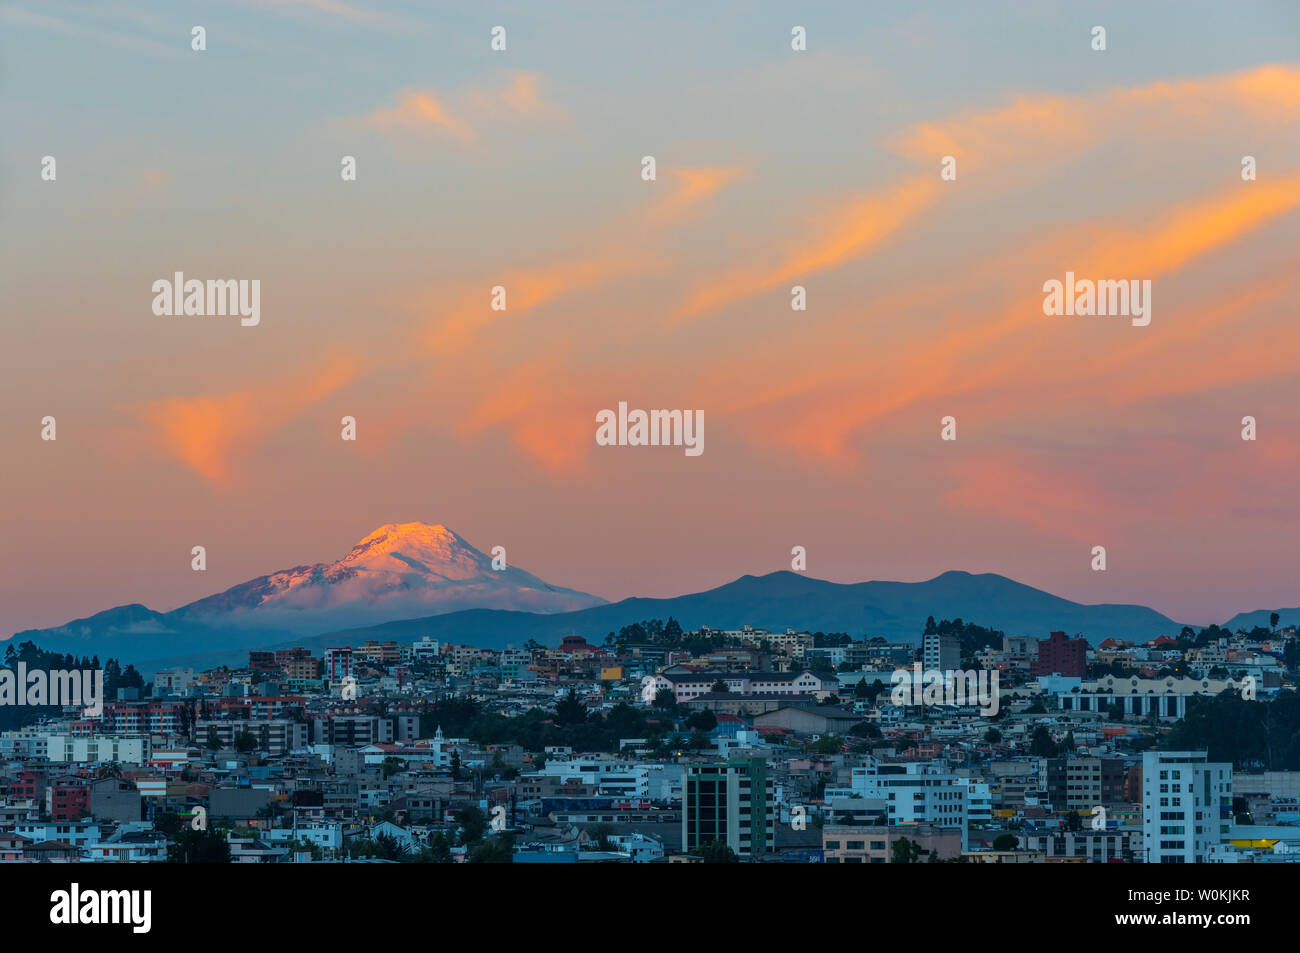 The majestic snowcapped Andes peak of the Cayambe volcano illuminated at sunset with the cityscape of Quito, Ecuador. Stock Photo